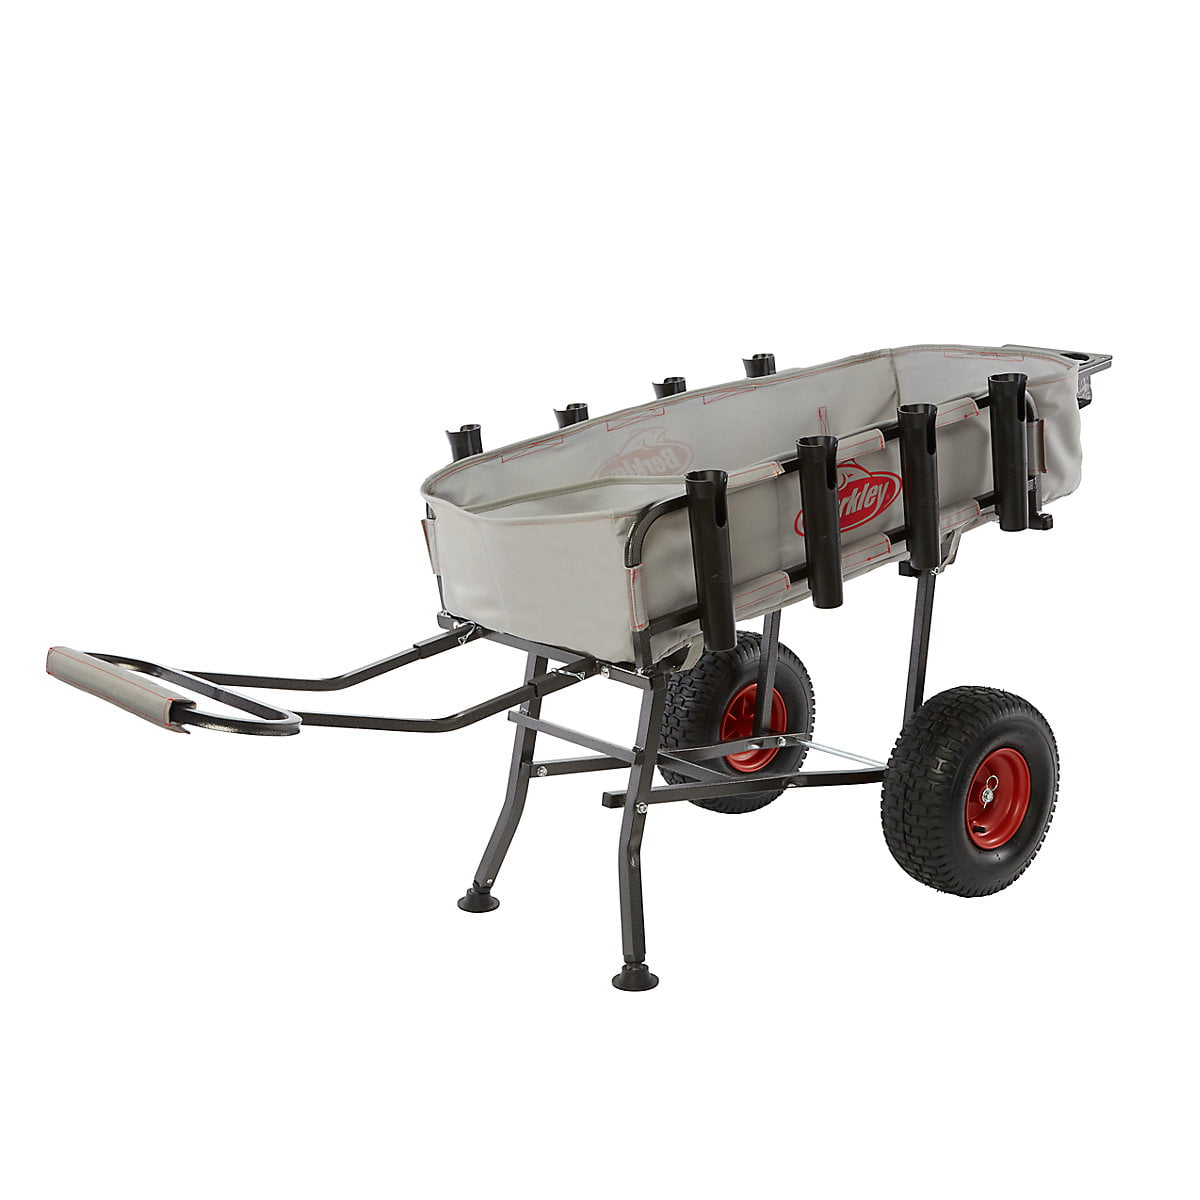  Customer reviews: Berkley Sportsman's Pro Cart, Portable Fishing  Cart, Corrosion Resistant Aluminum Frame and Heavy Duty Outer Fabric,  Easily Organize and Transport All Your Gear